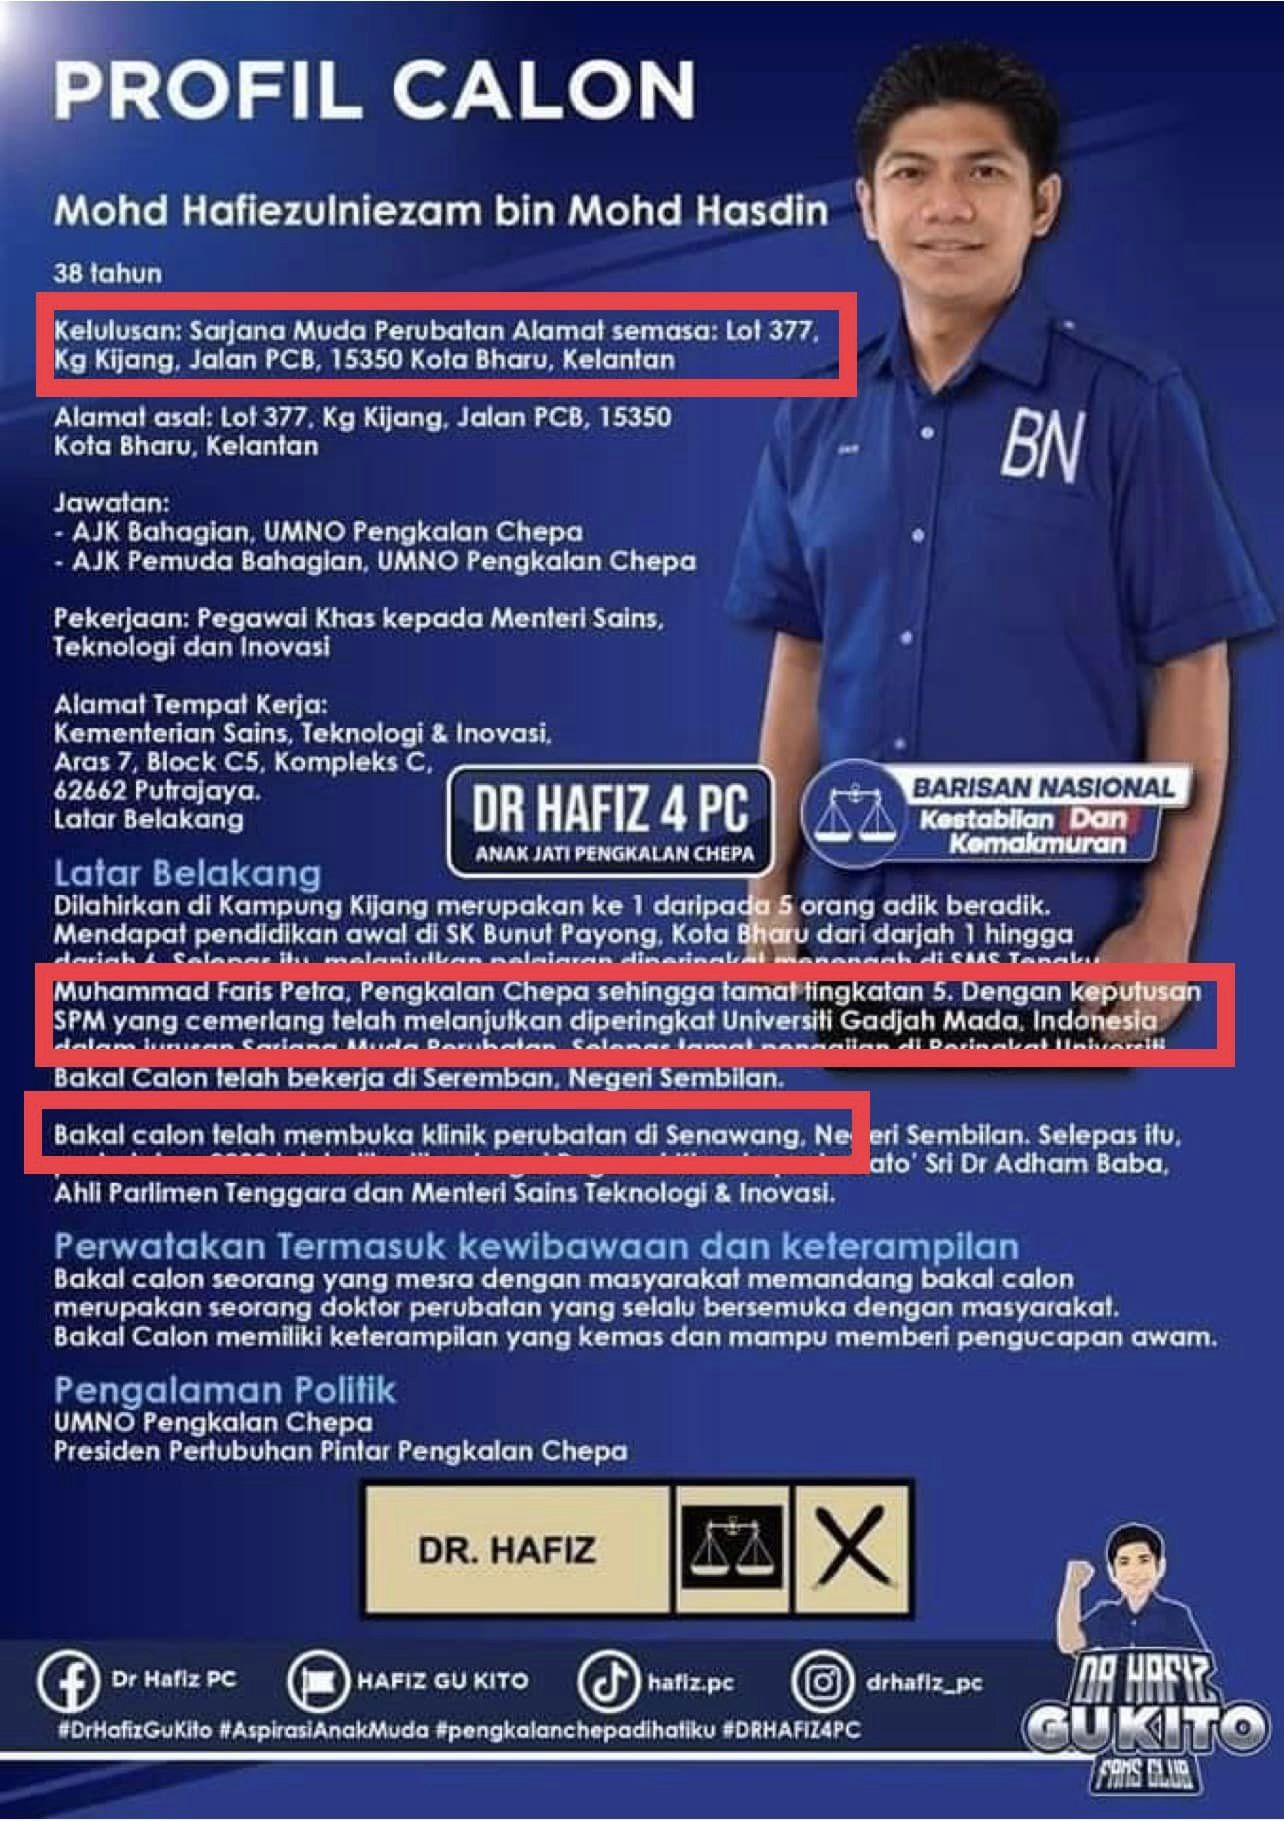 Bn's pengkalan chepa candidate is accused of being a fake doctor